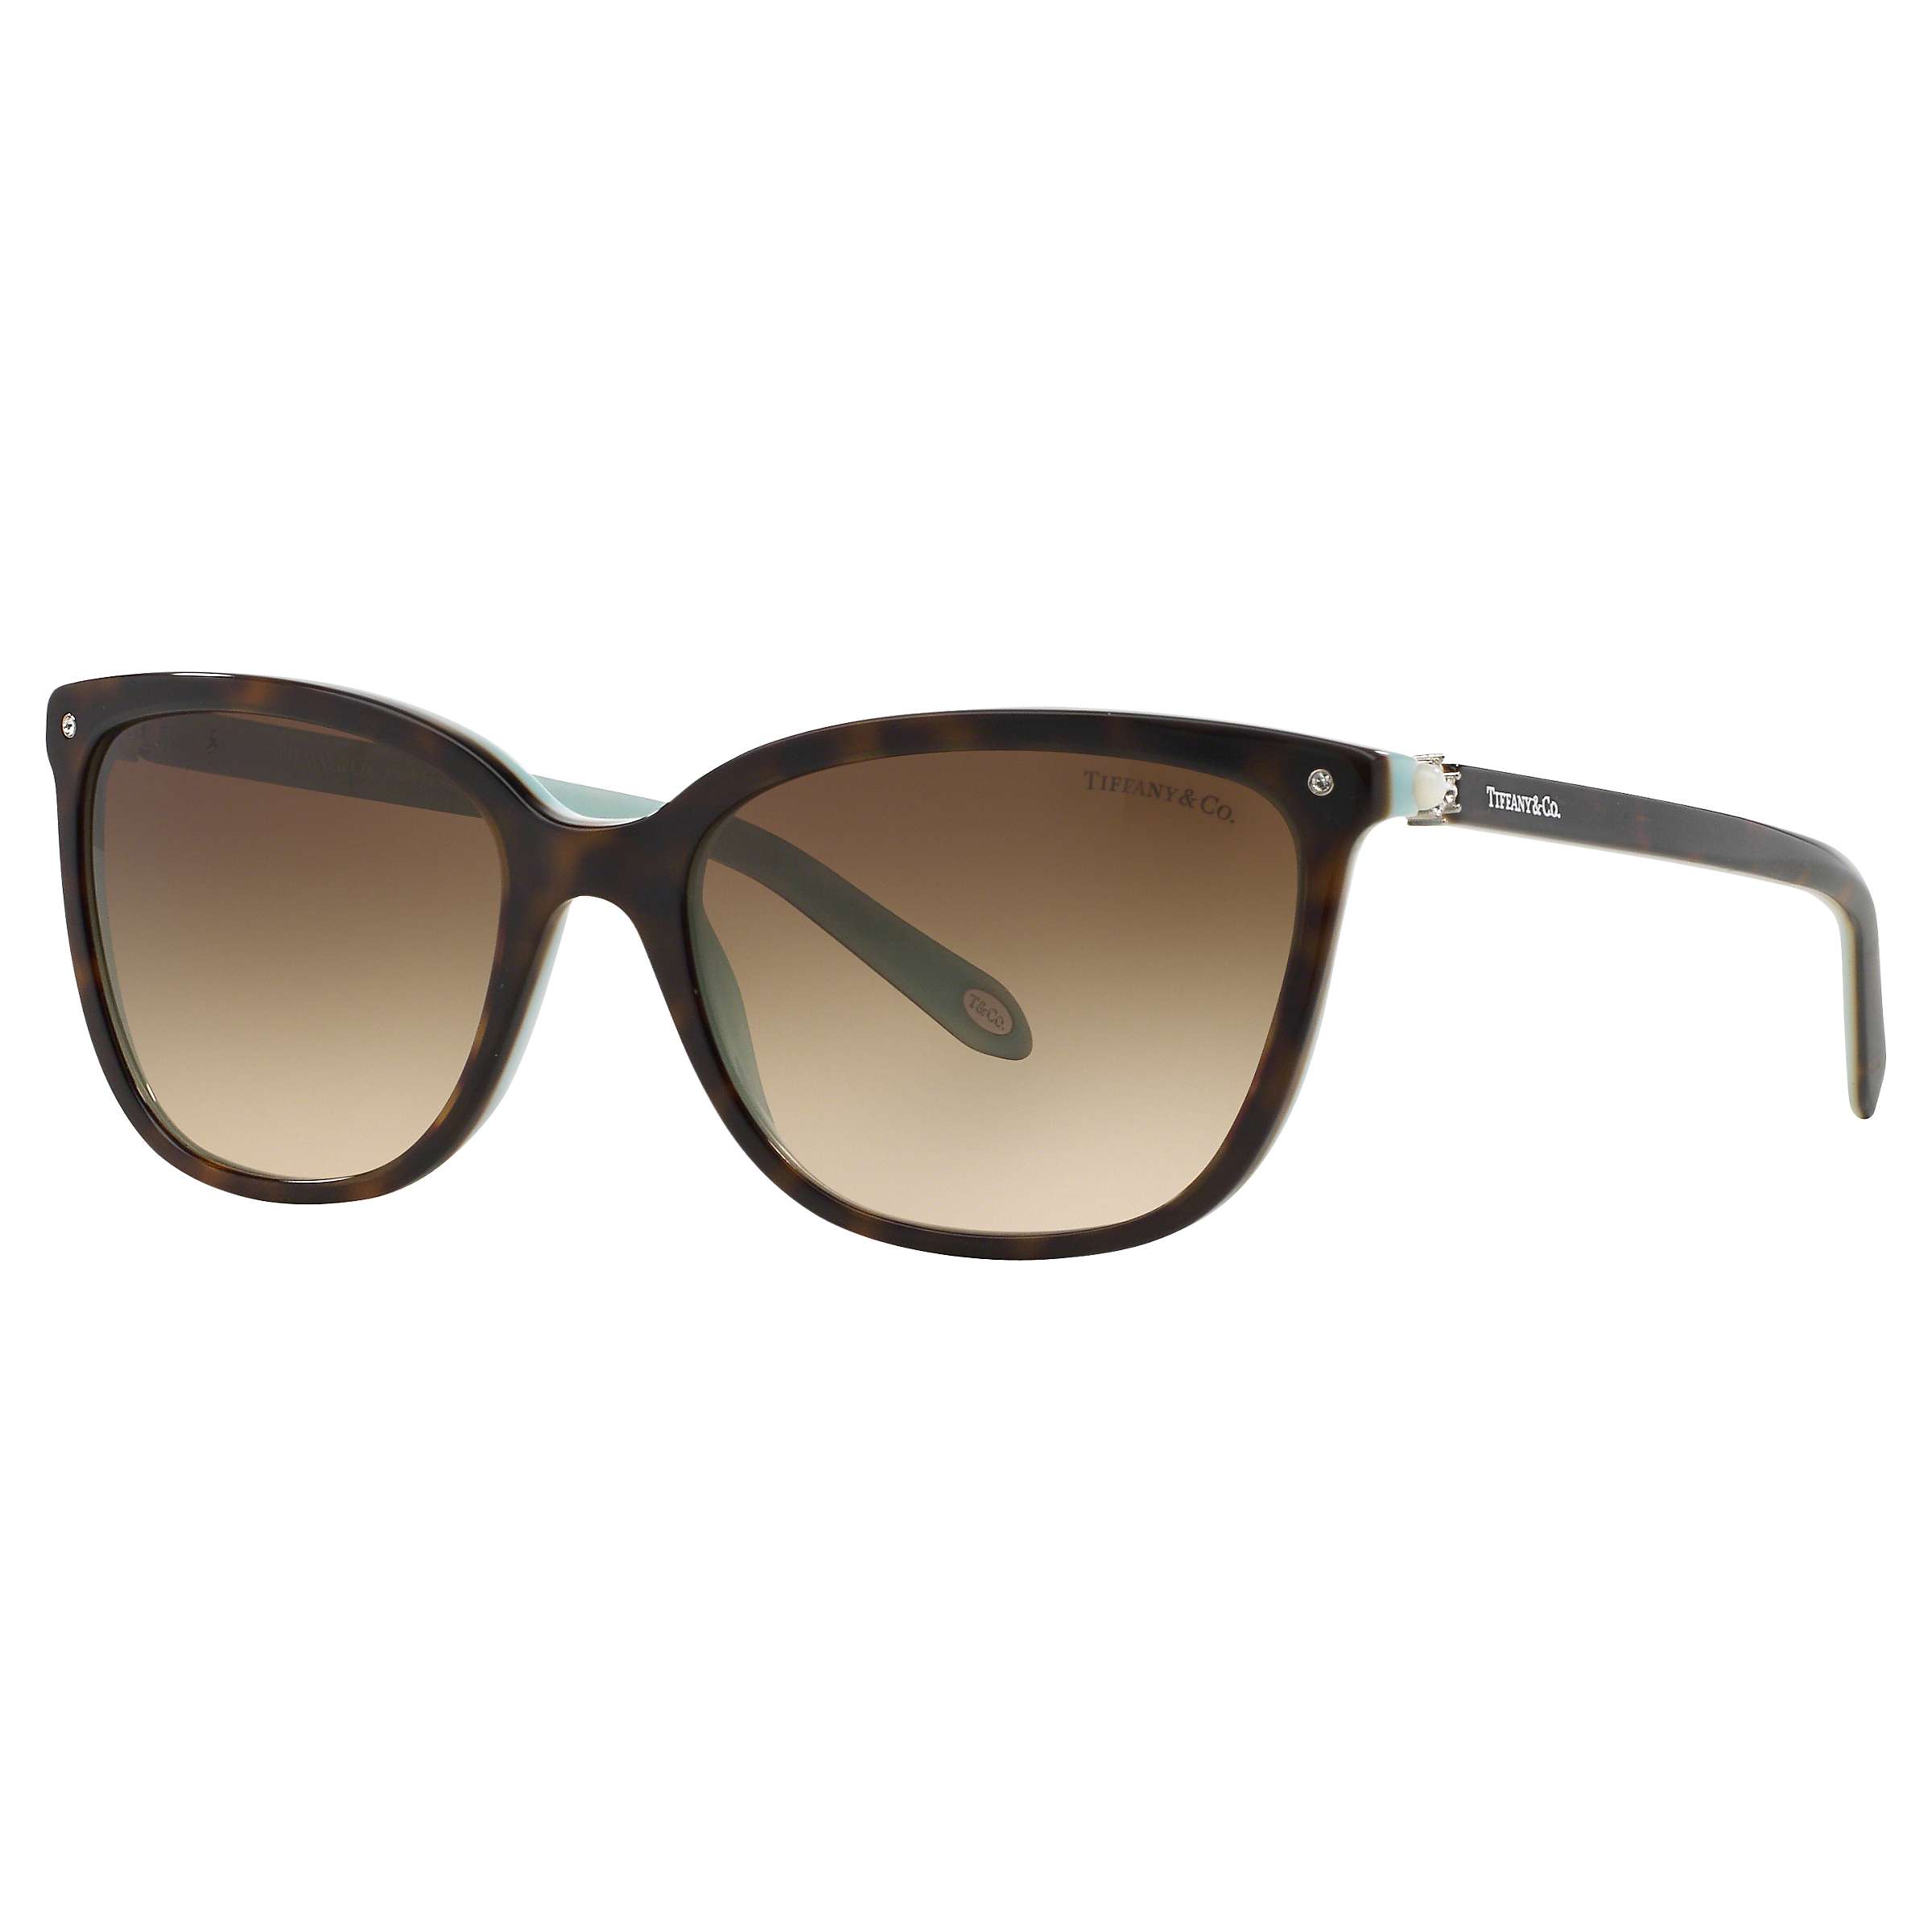 Buy Tiffany & Co TF4105HB Square Sunglasses Online at johnlewis.com